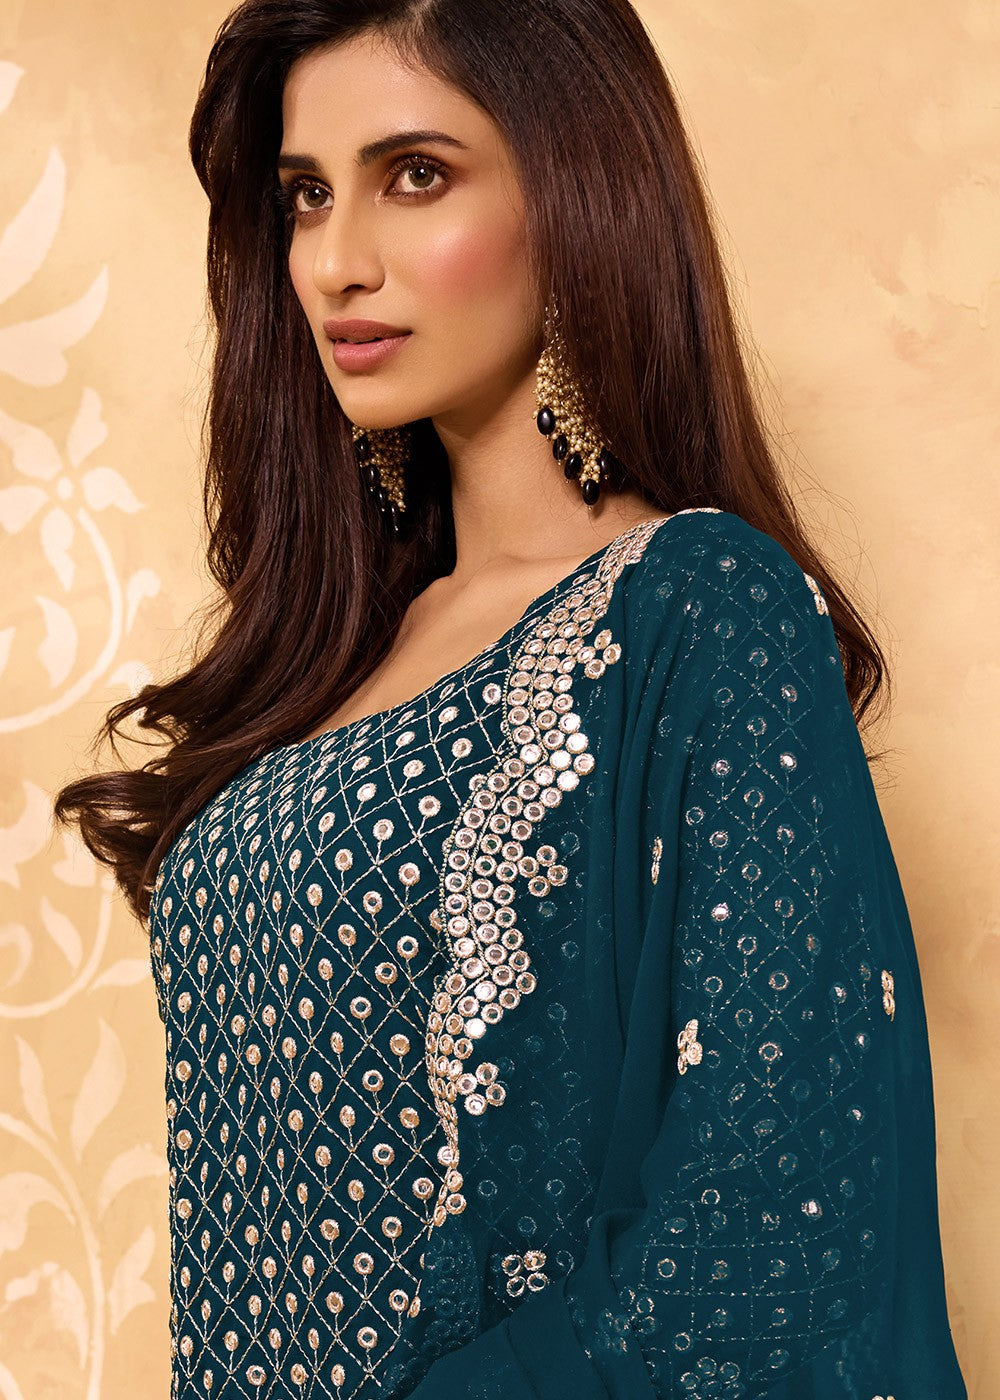 Buy Peacock Blue Party Style Suit - Designer Sharara Suit